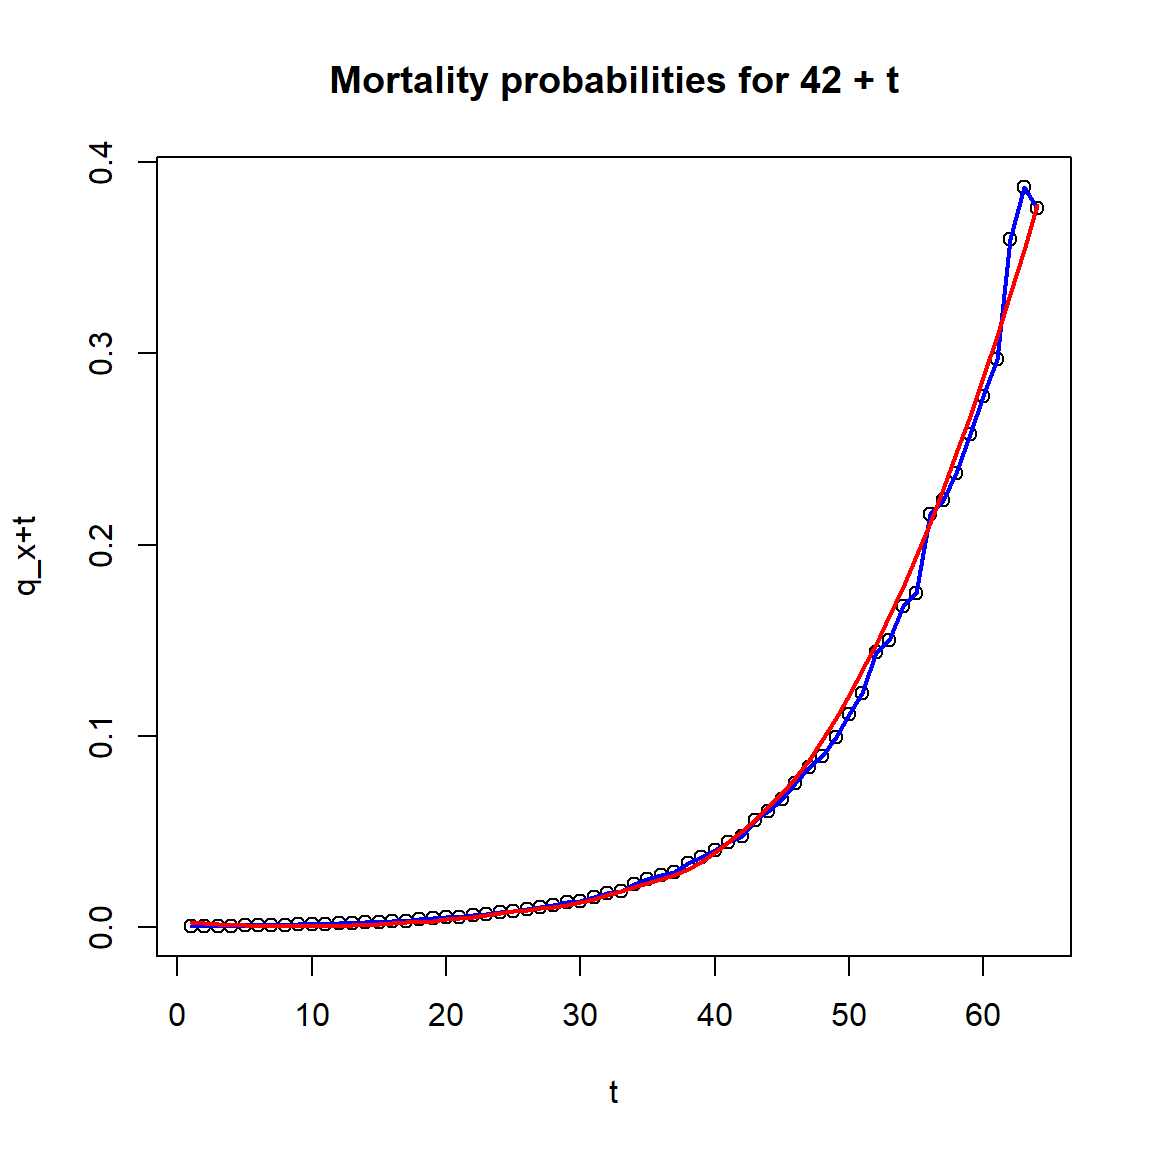 Mortality probabilities for a 42-year-old non-smoking male with a BMI of 28 and a blood pressure of 127.